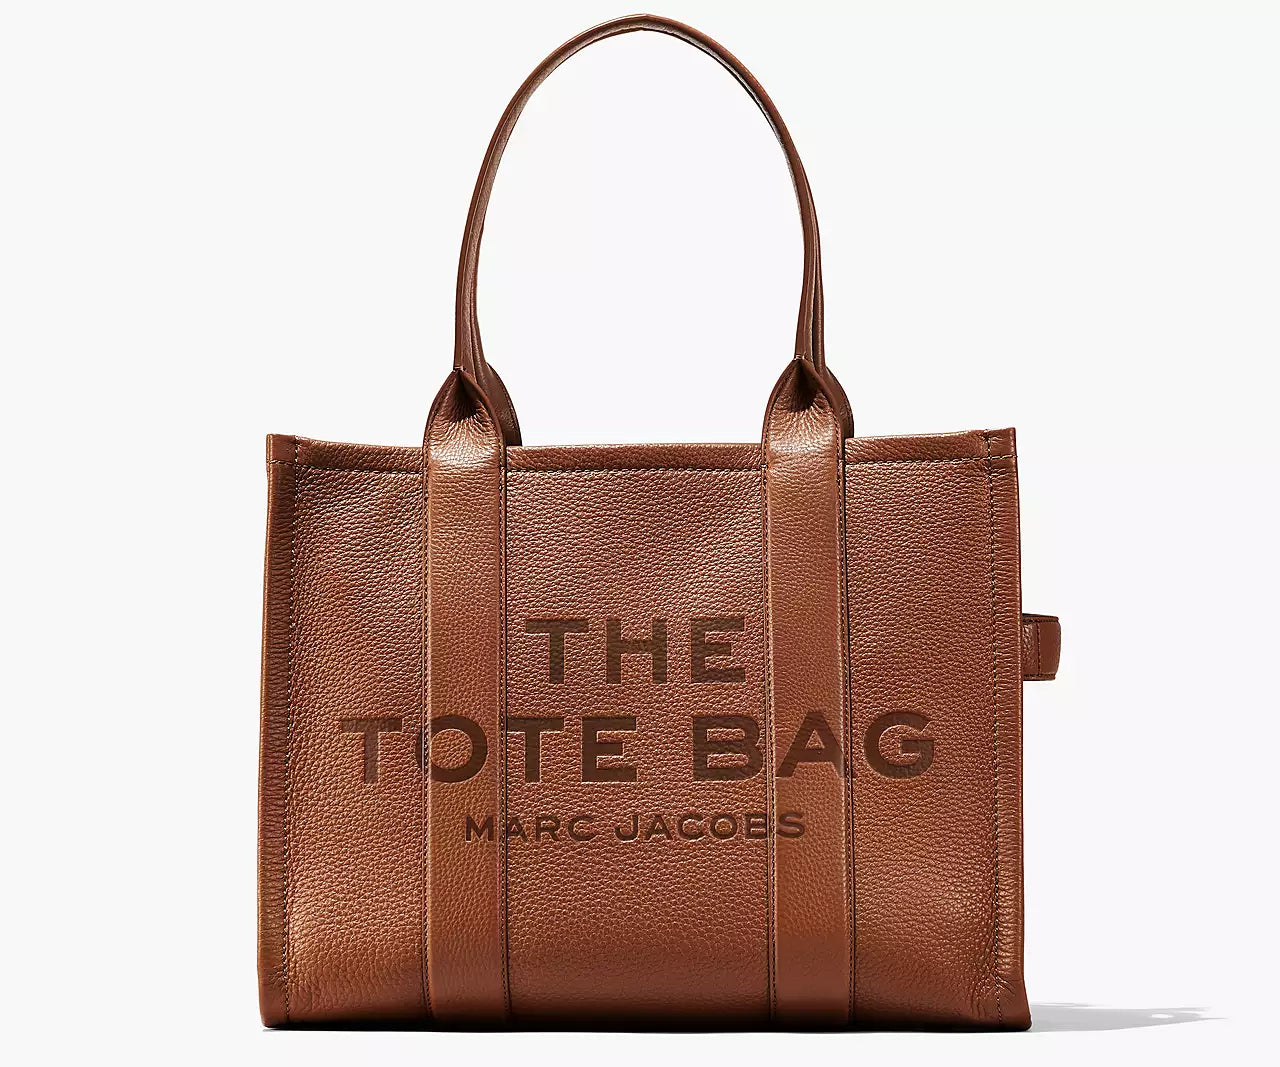 THE LEATHER LARGE TOTE BAG- Argan Oil